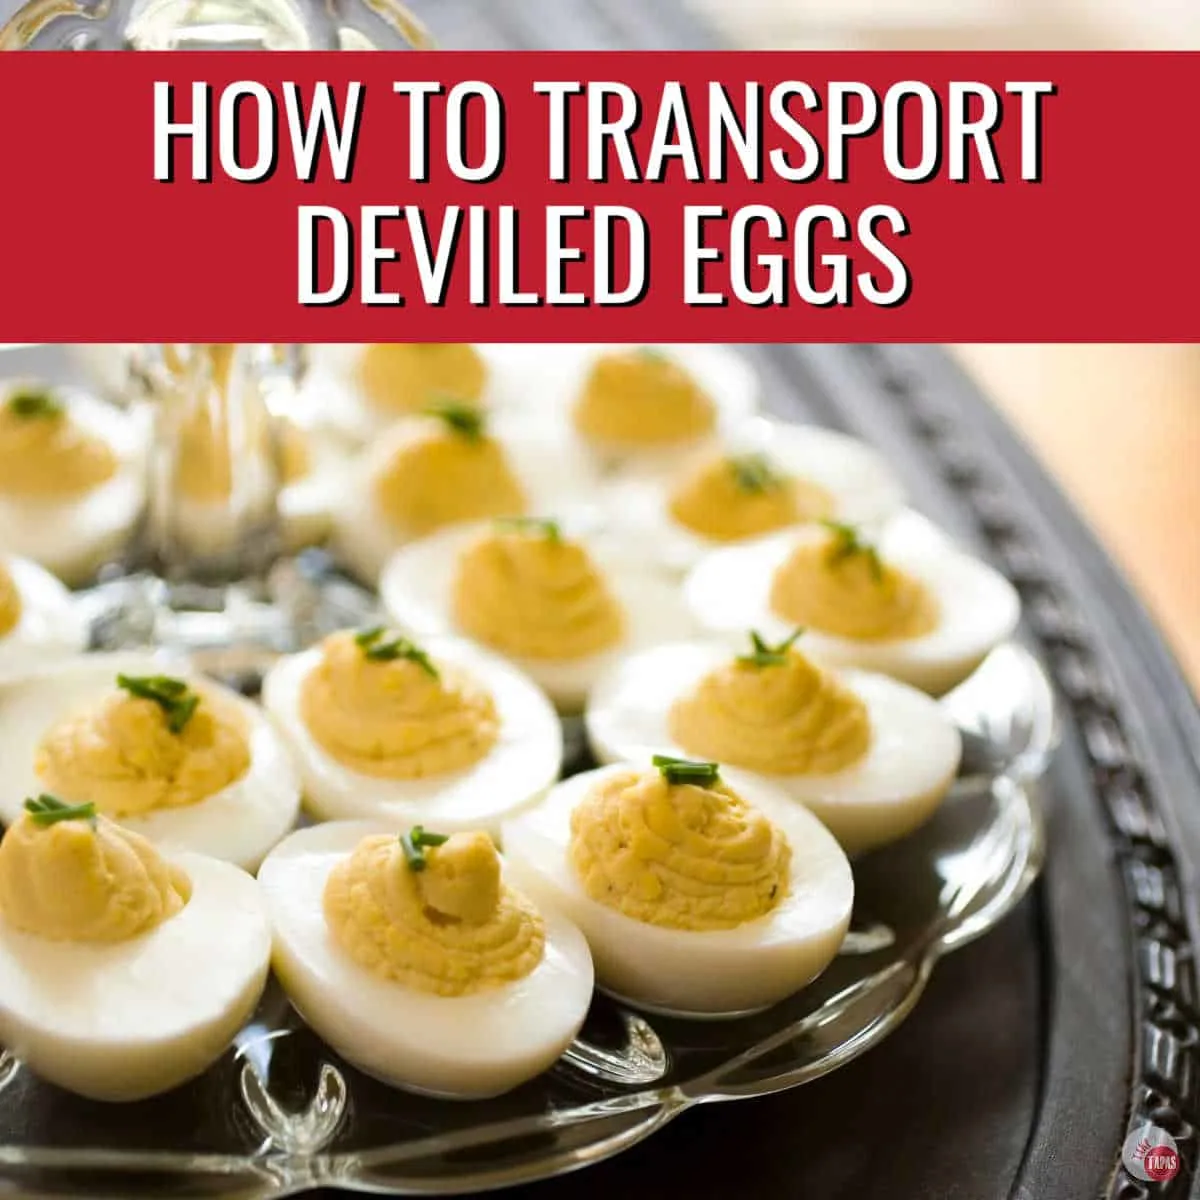 clear tray of deviled eggs with red banner and text